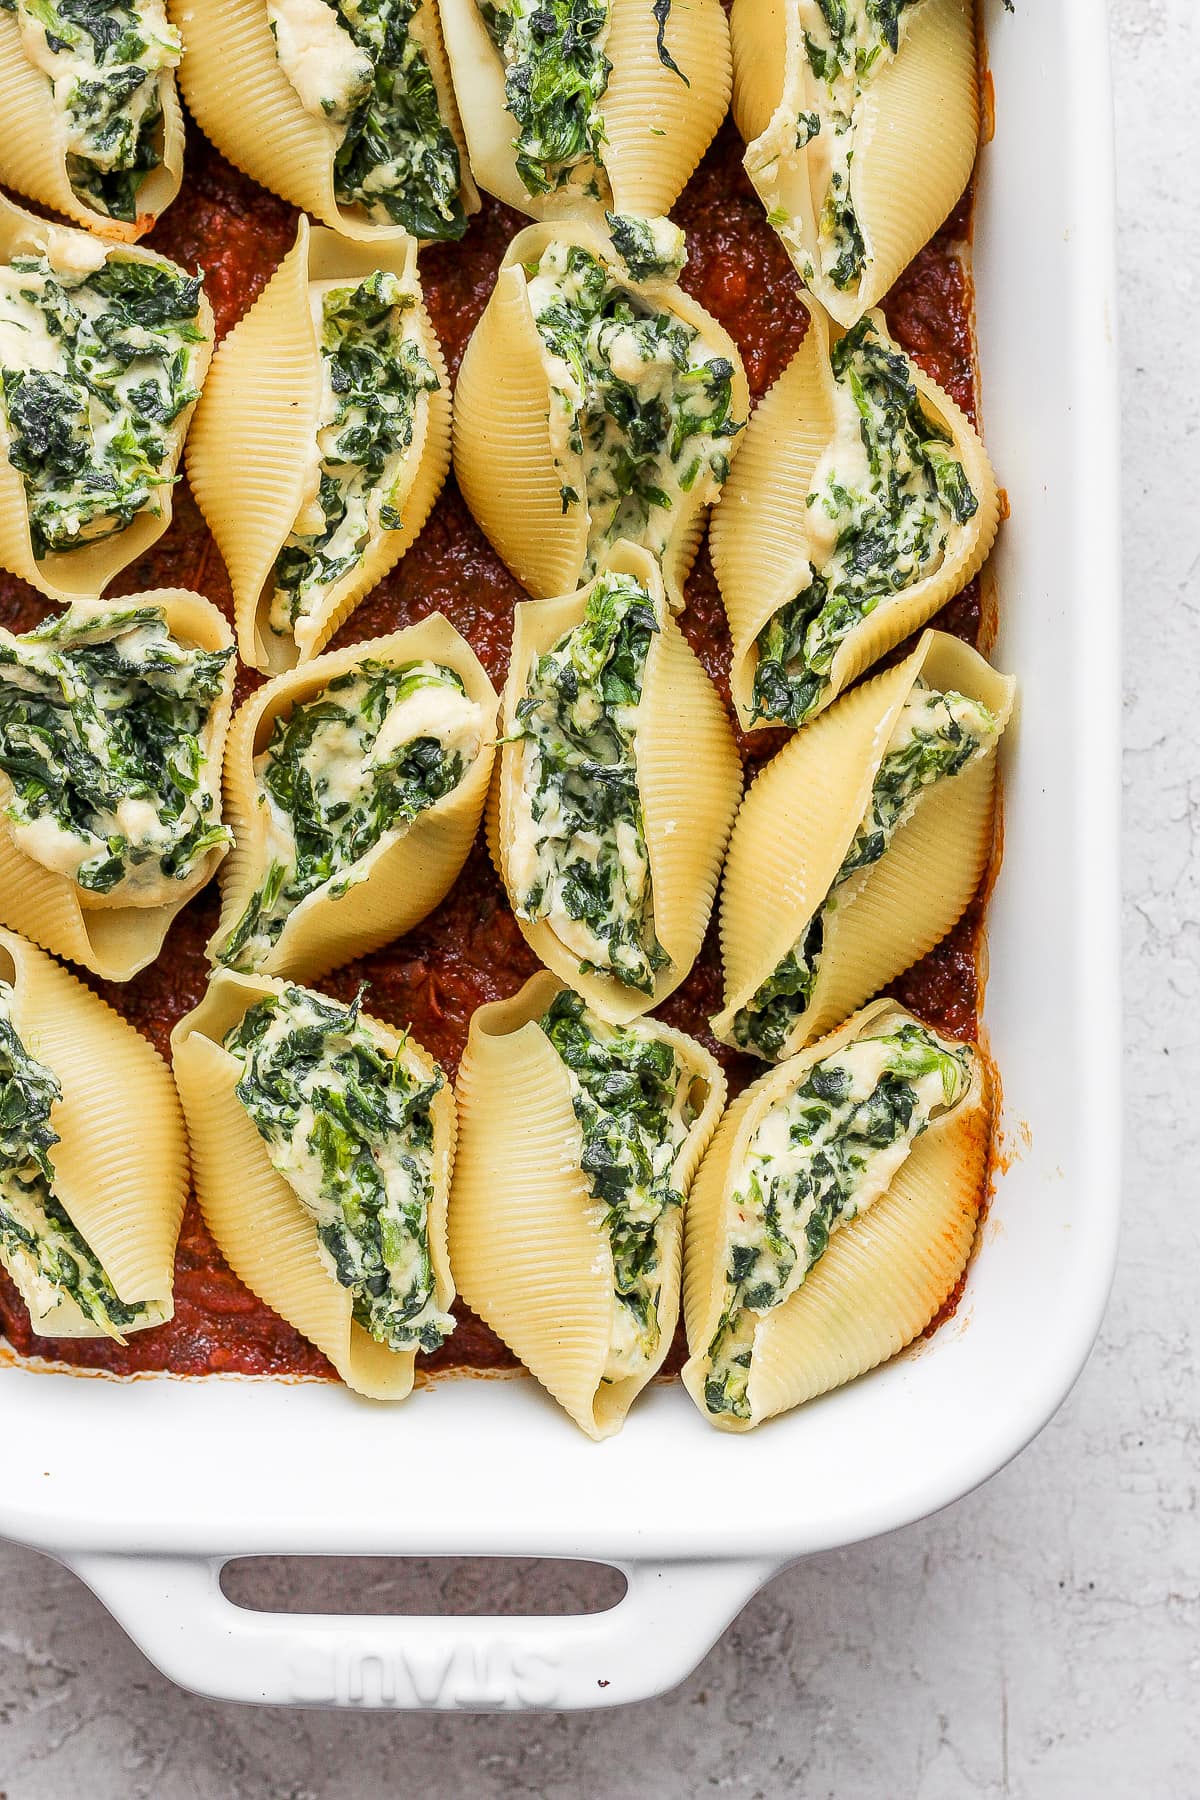 Baked stuffed shells after baking in the oven.